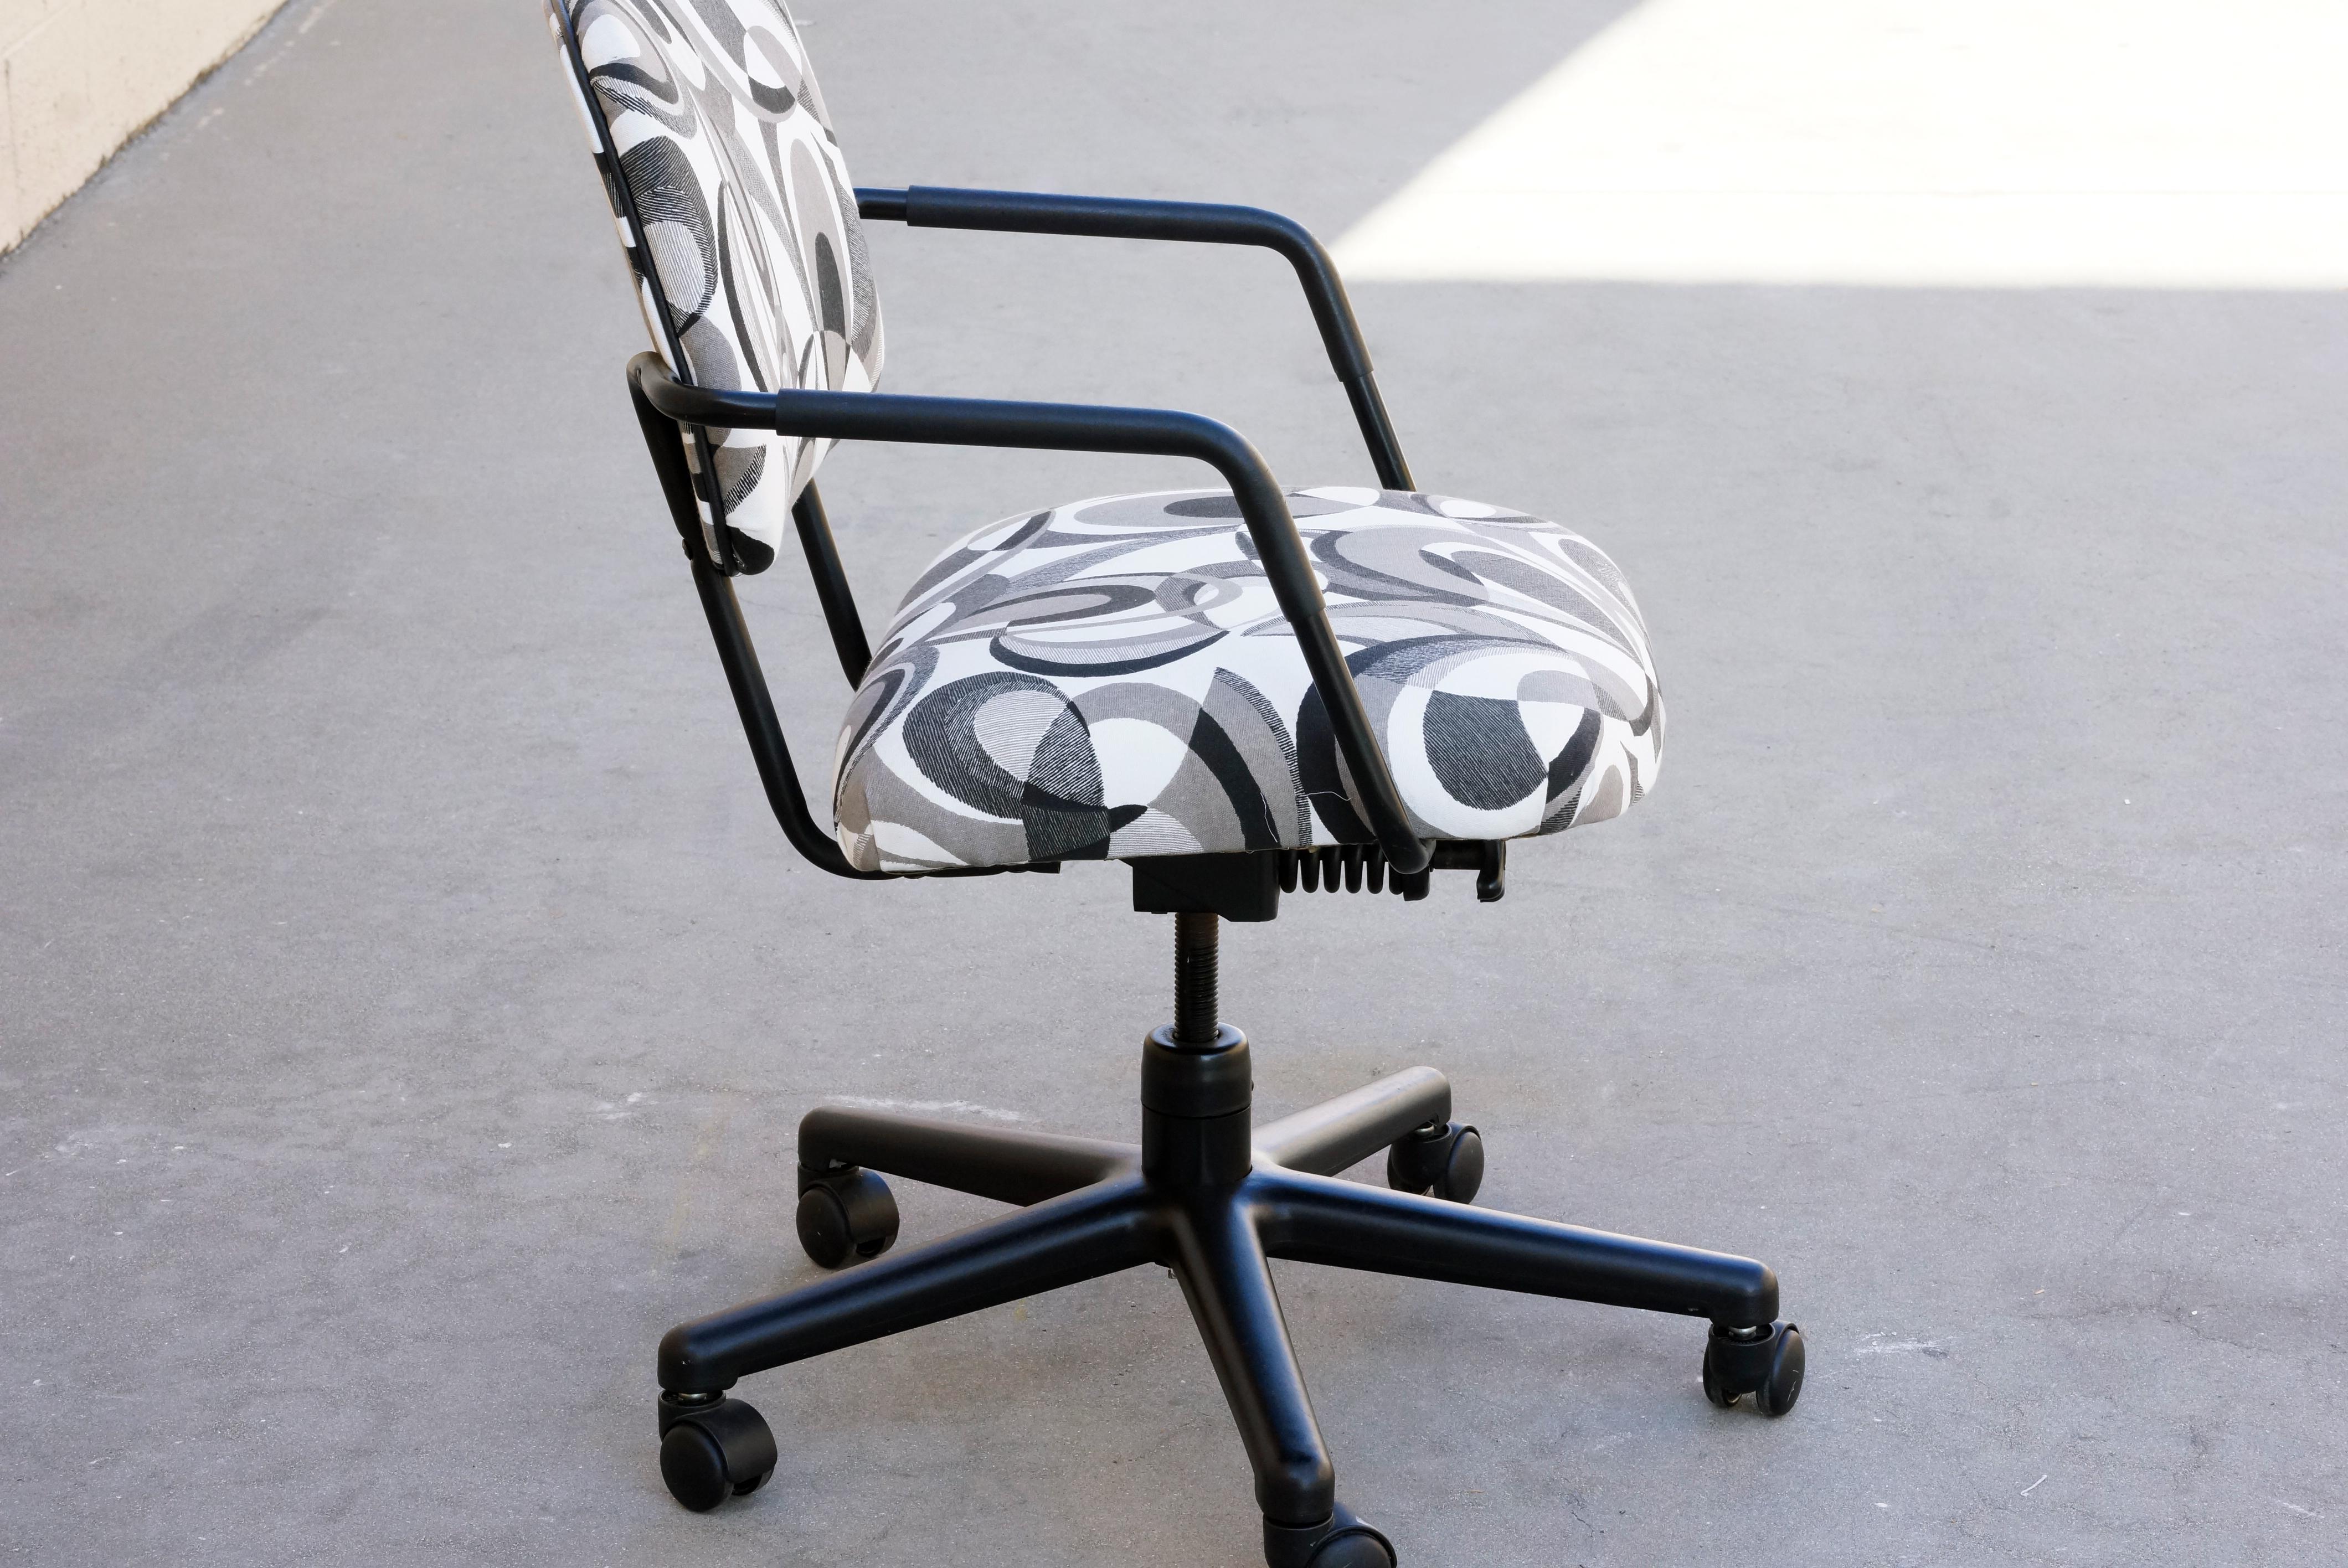 Vintage 1990s office chair reupholstered in a groovy abstract fabric. Uncommon thin steel tube frame with plastic cover. Well made and ergonomic with tilt, seat height and swivel adjustments. Made in USA.

Dimensions: 23.5 W x 22 D x 33 H x 16-19